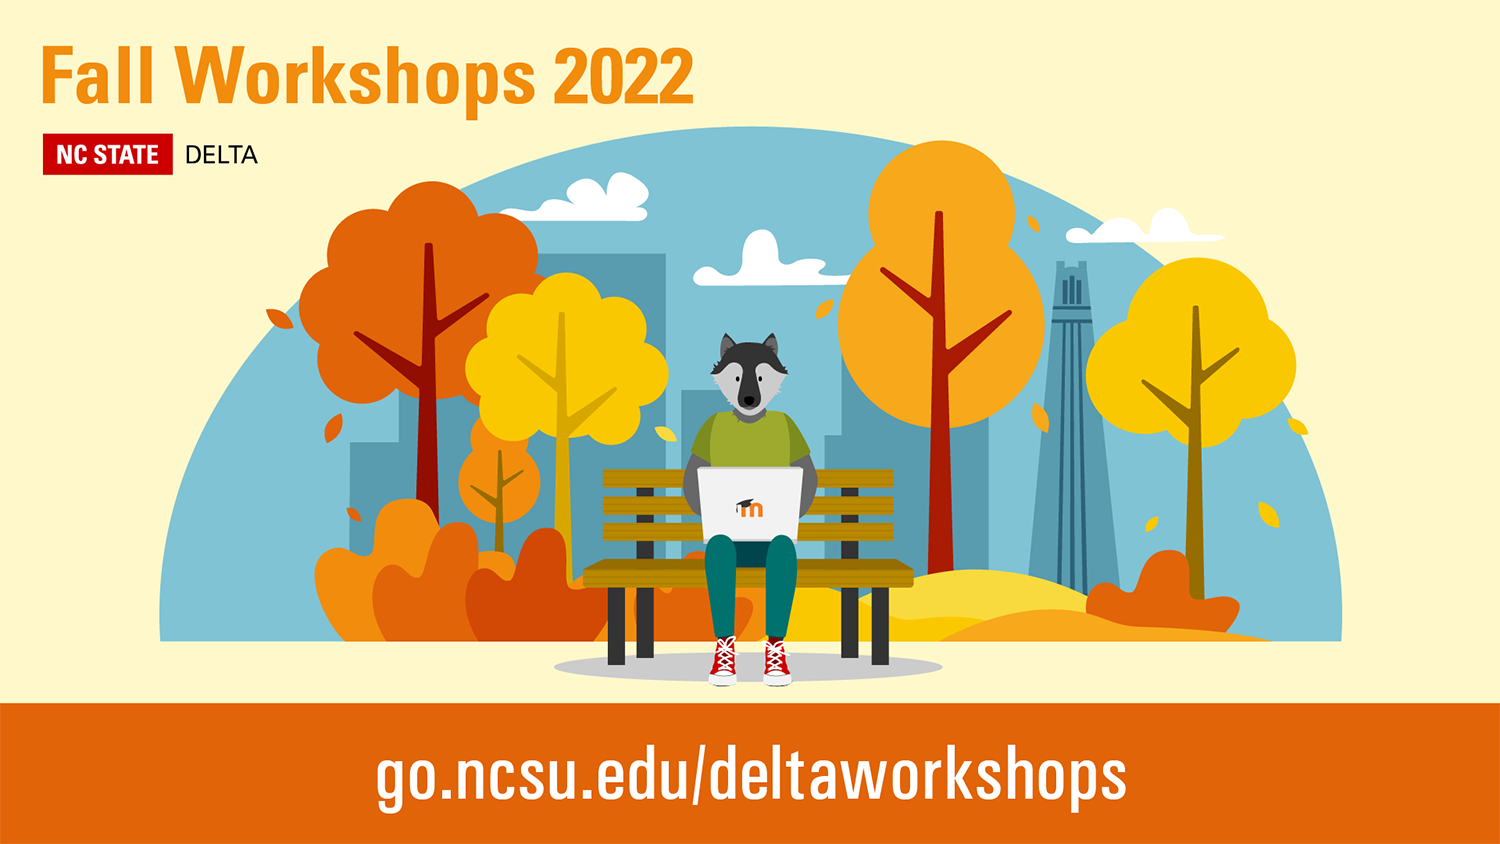 Decorative image showing a wolf sitting on a bench working on a laptop with fall colorful trees in the background "Fall Workshops 2022, NC State, DELTA,